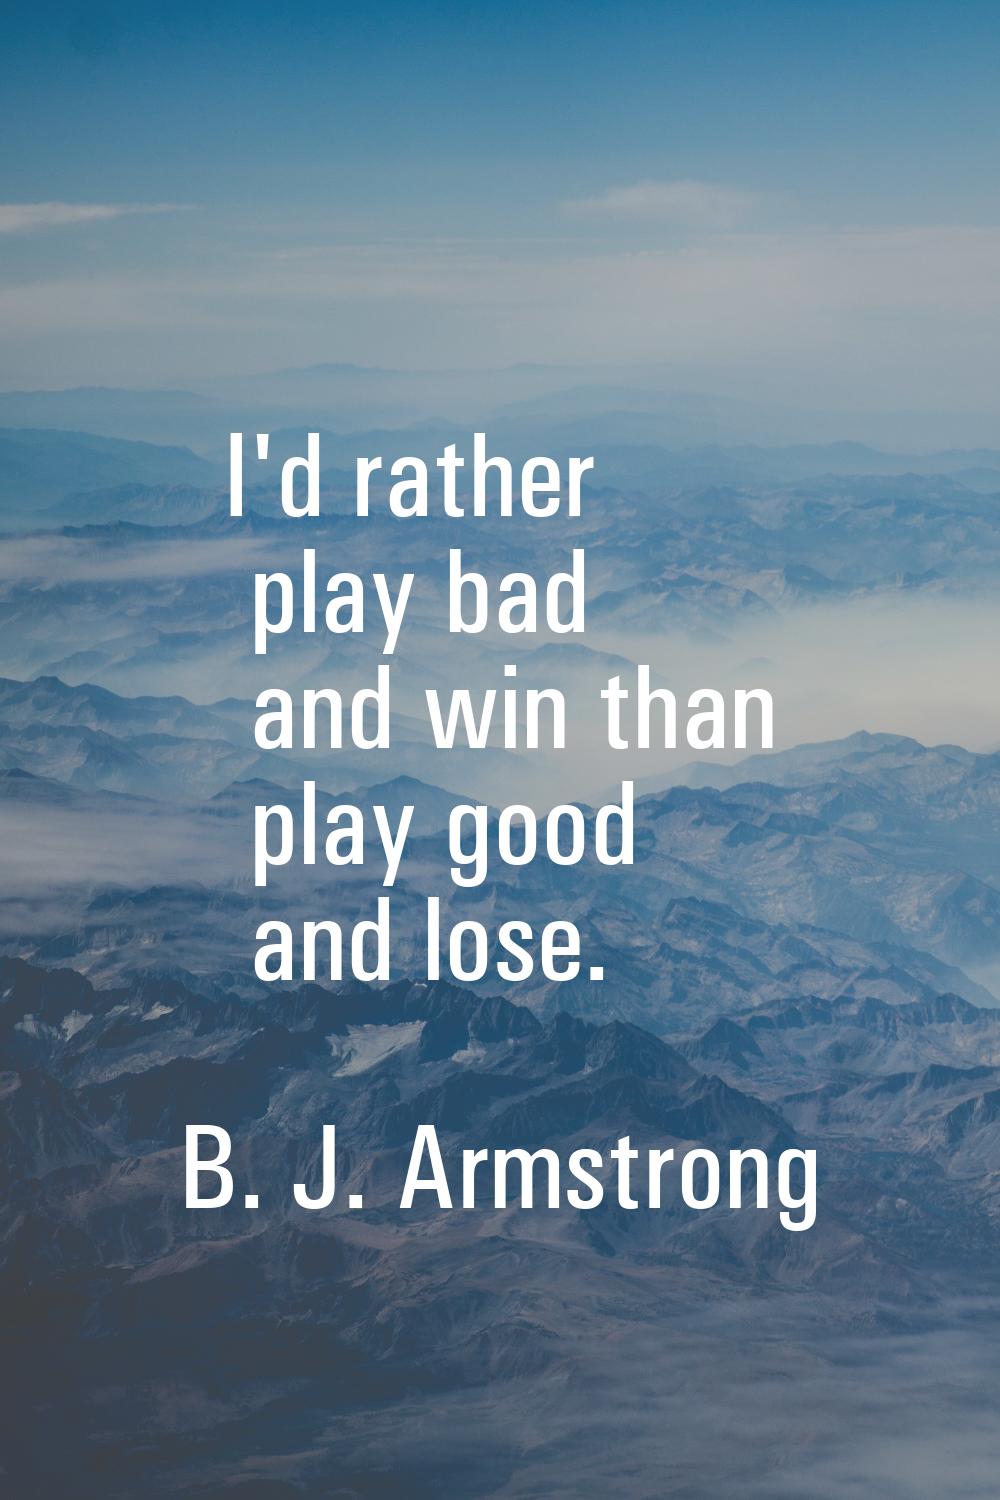 I'd rather play bad and win than play good and lose.